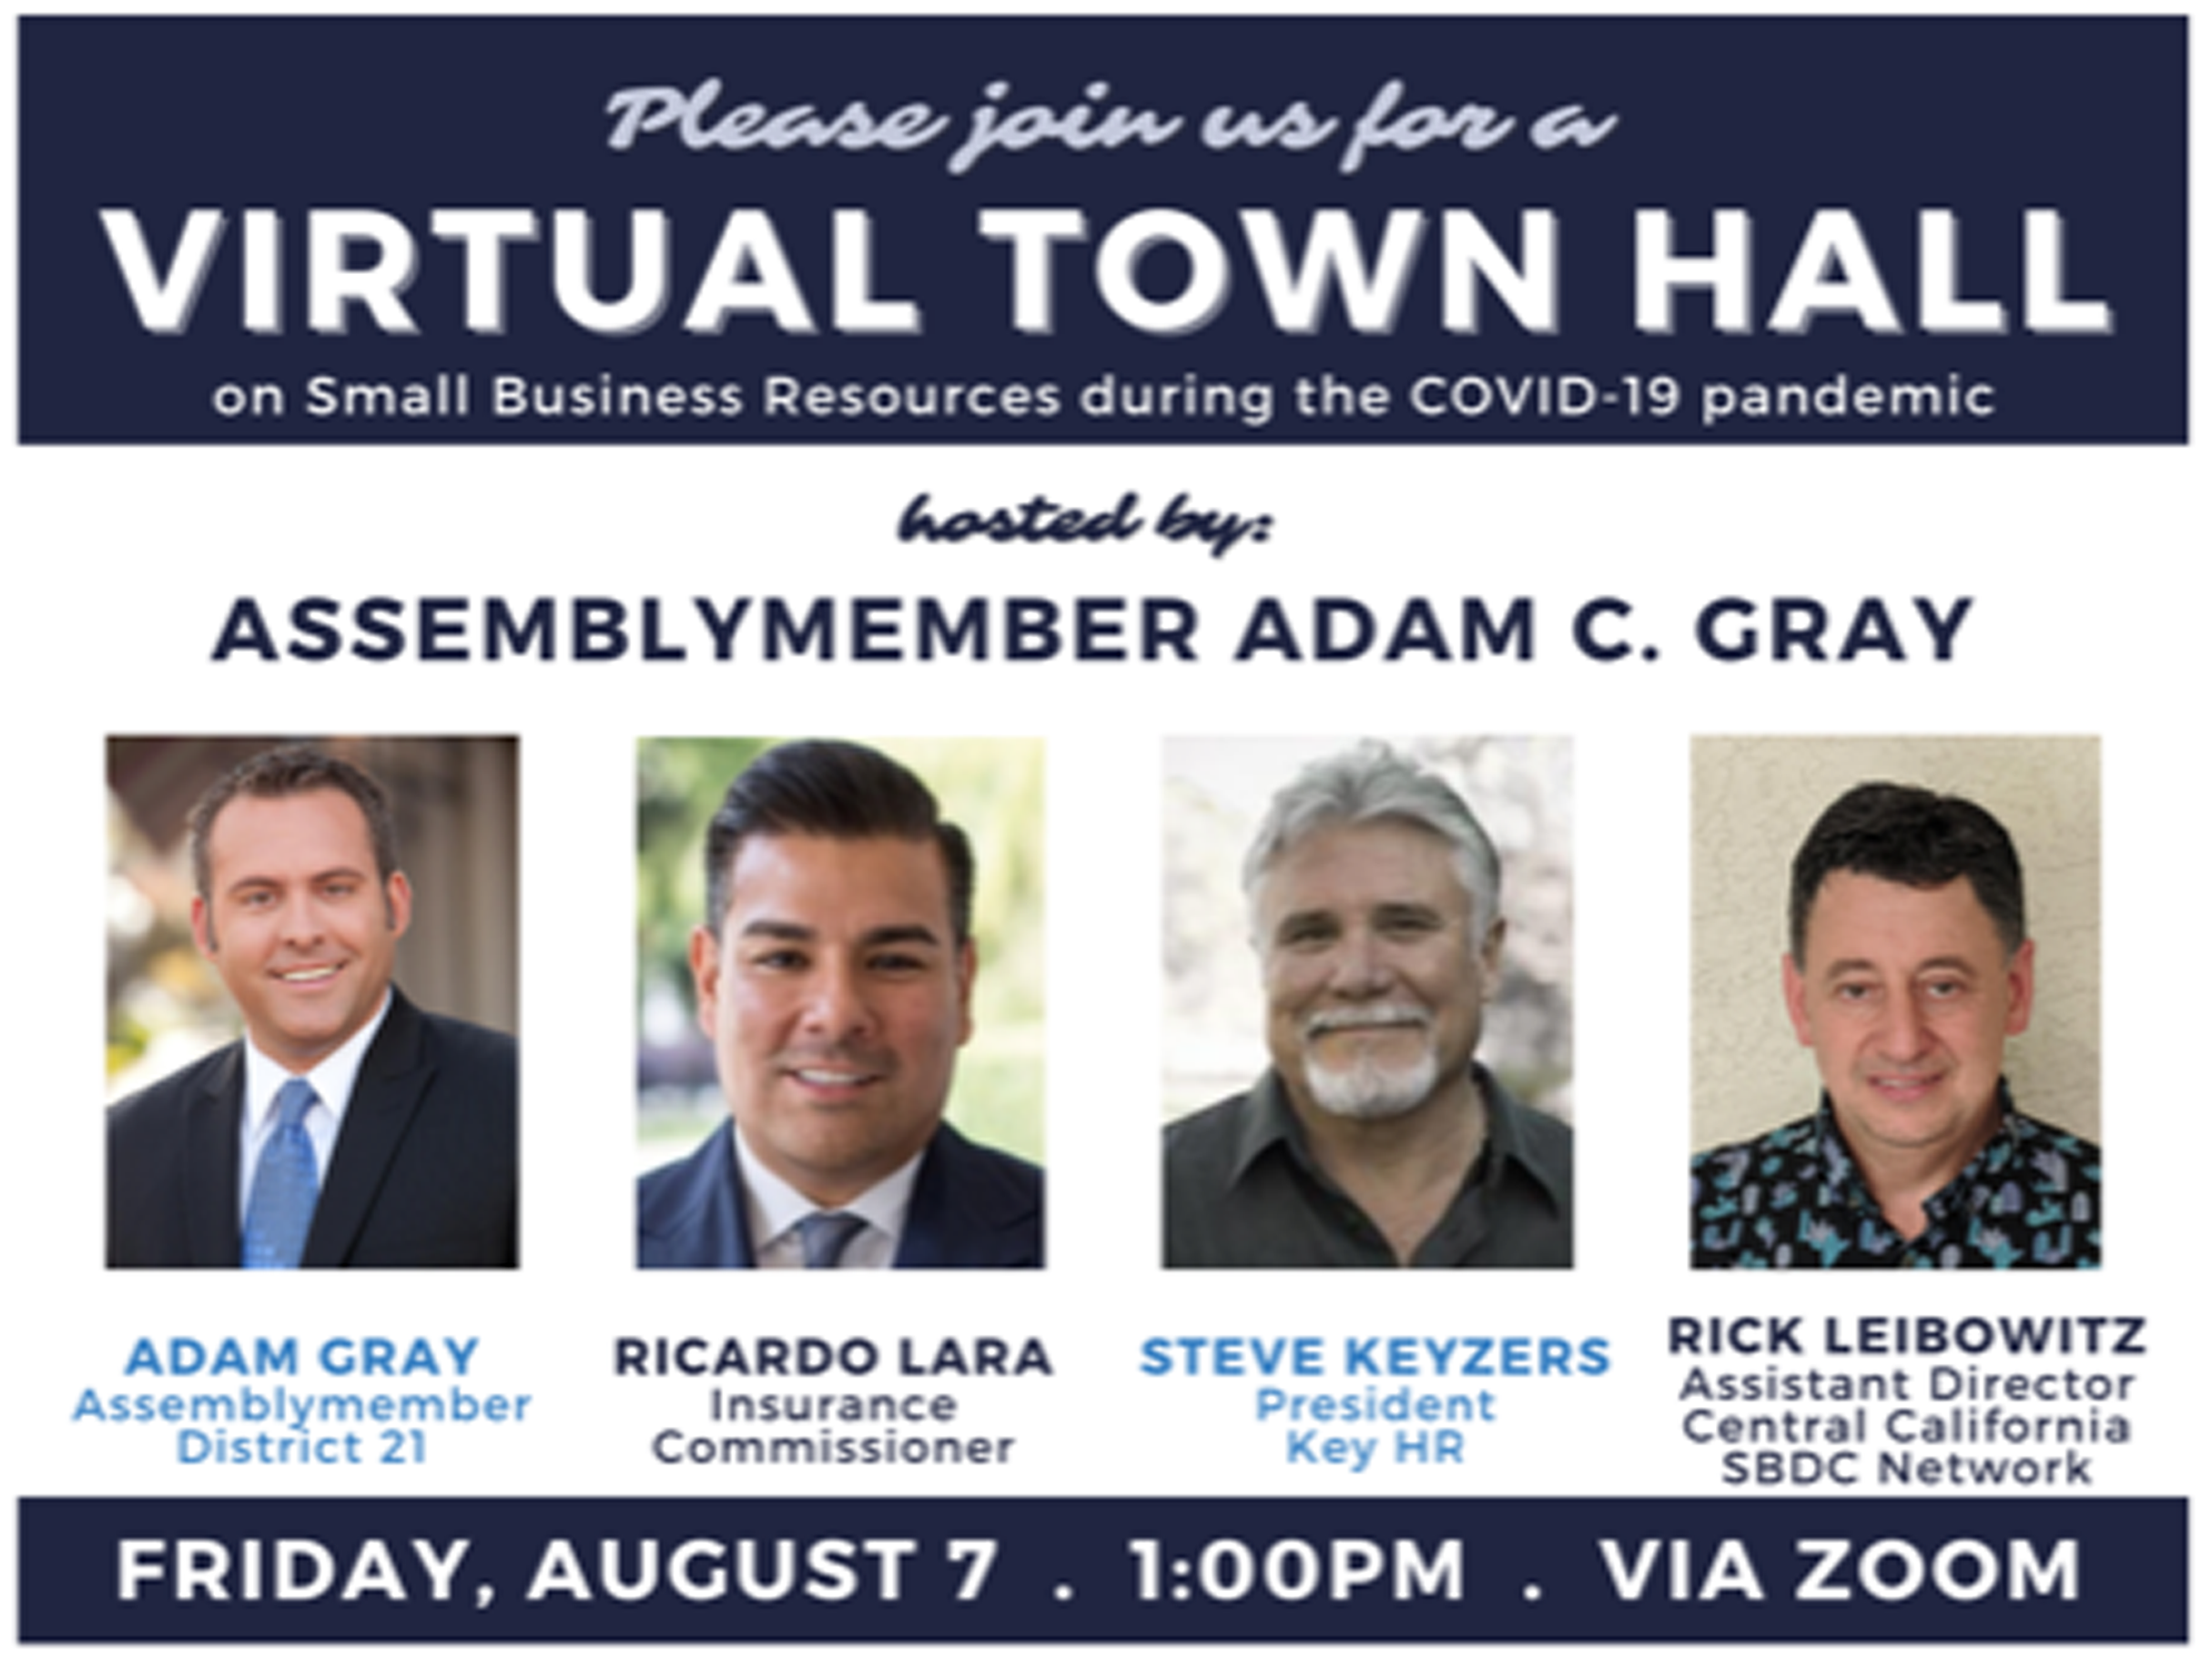 Please join assemblymember Adam Gray and guest speakers Steve Keyzers, President Key HR, and Rick Leibowitz, Asst Central Calif SBDC Network in a virtual conversation with California Insurance Commissioner Ricardo Lara. 